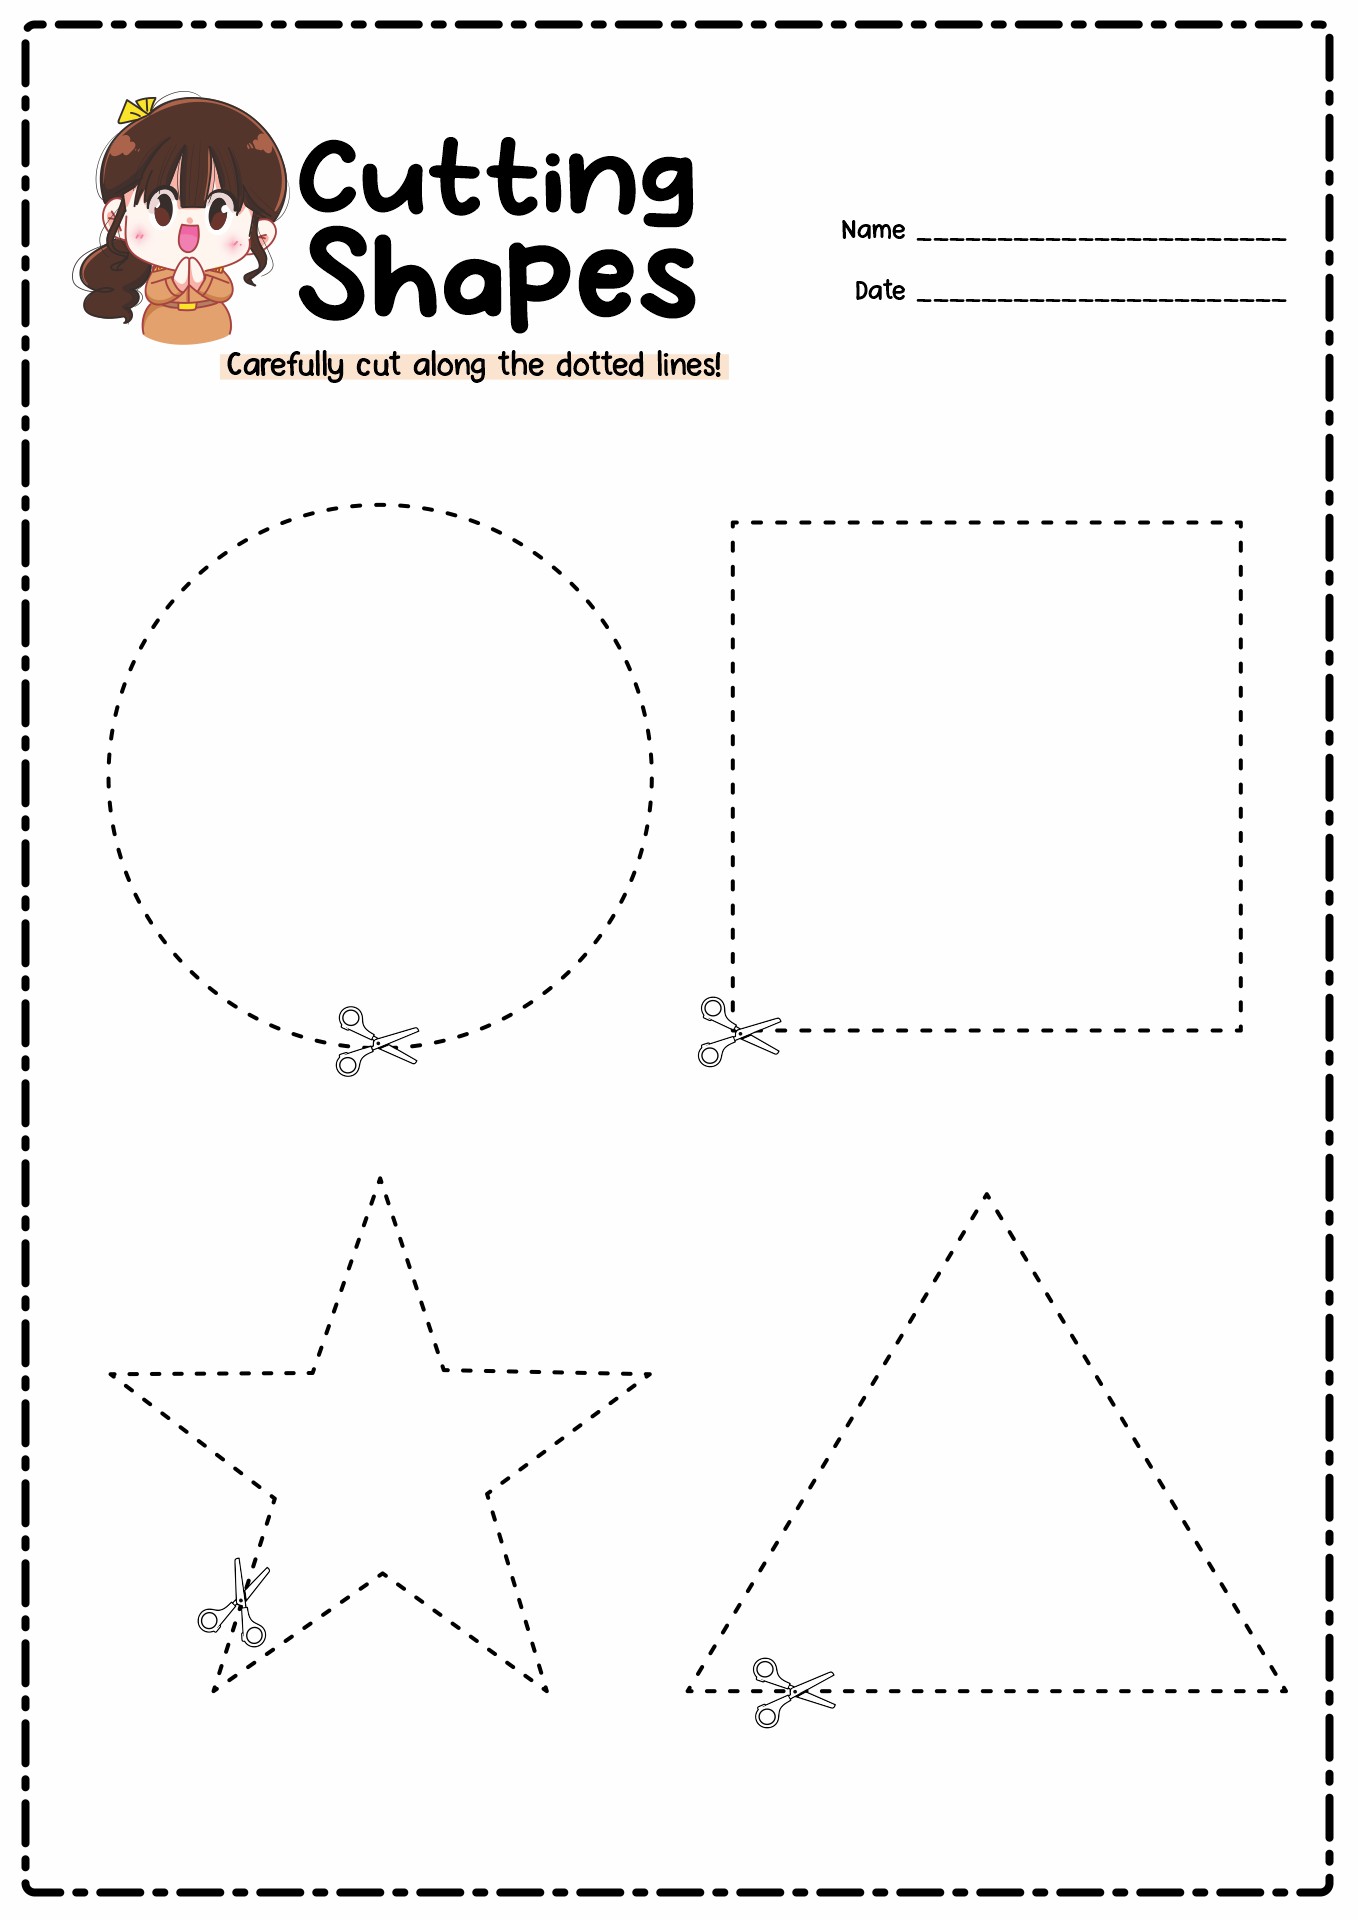 Preschool Printable Cutting Pages Image